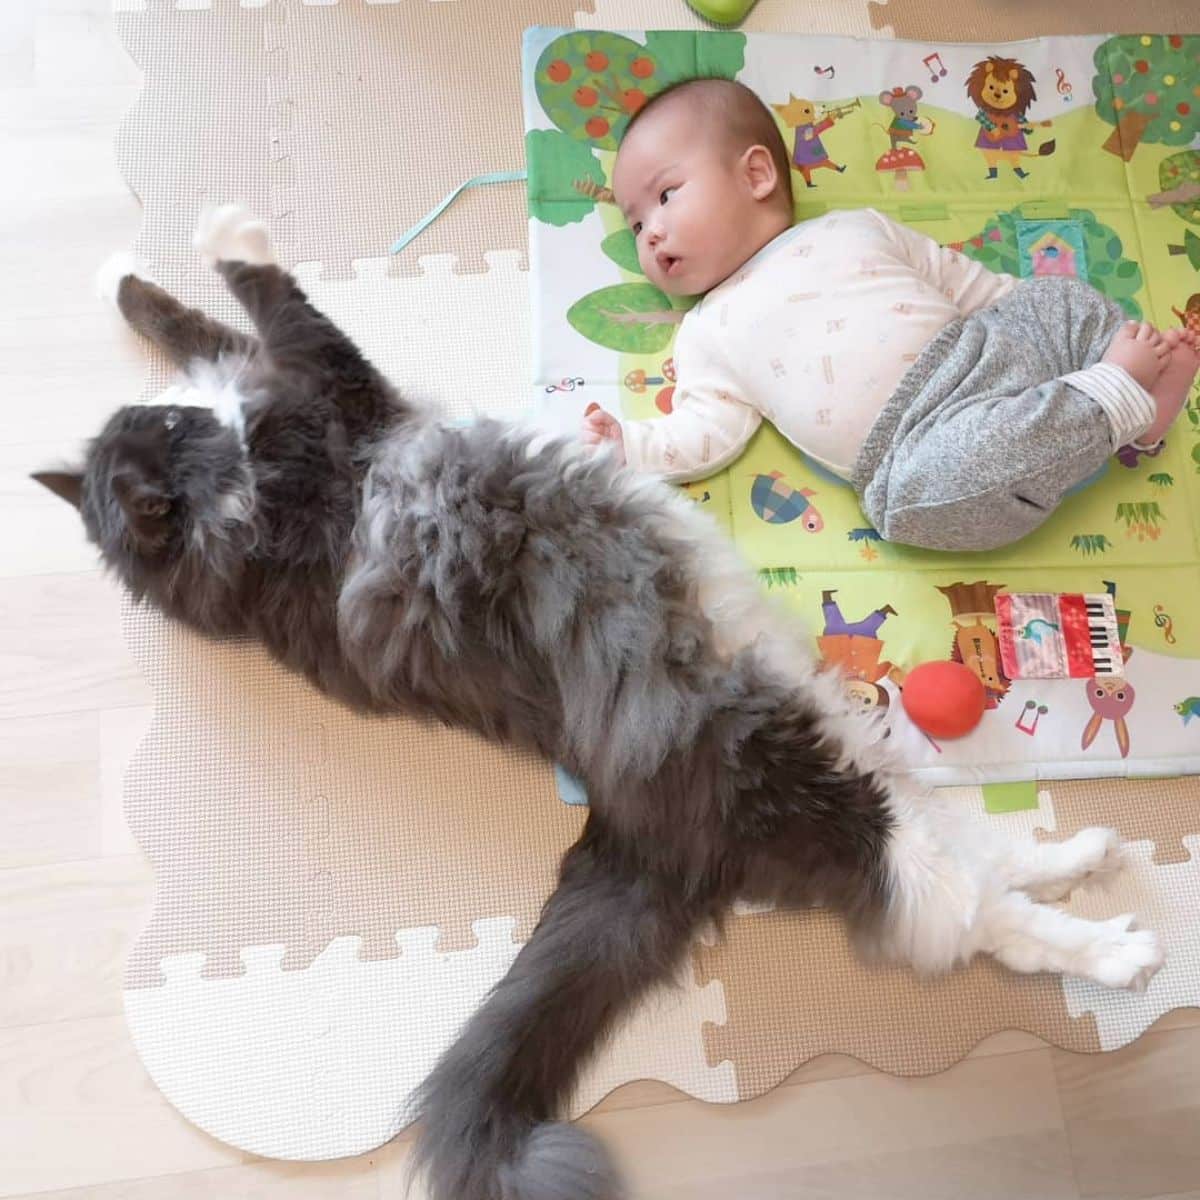 A baby looking at a big gray maine coon stretching its paws.